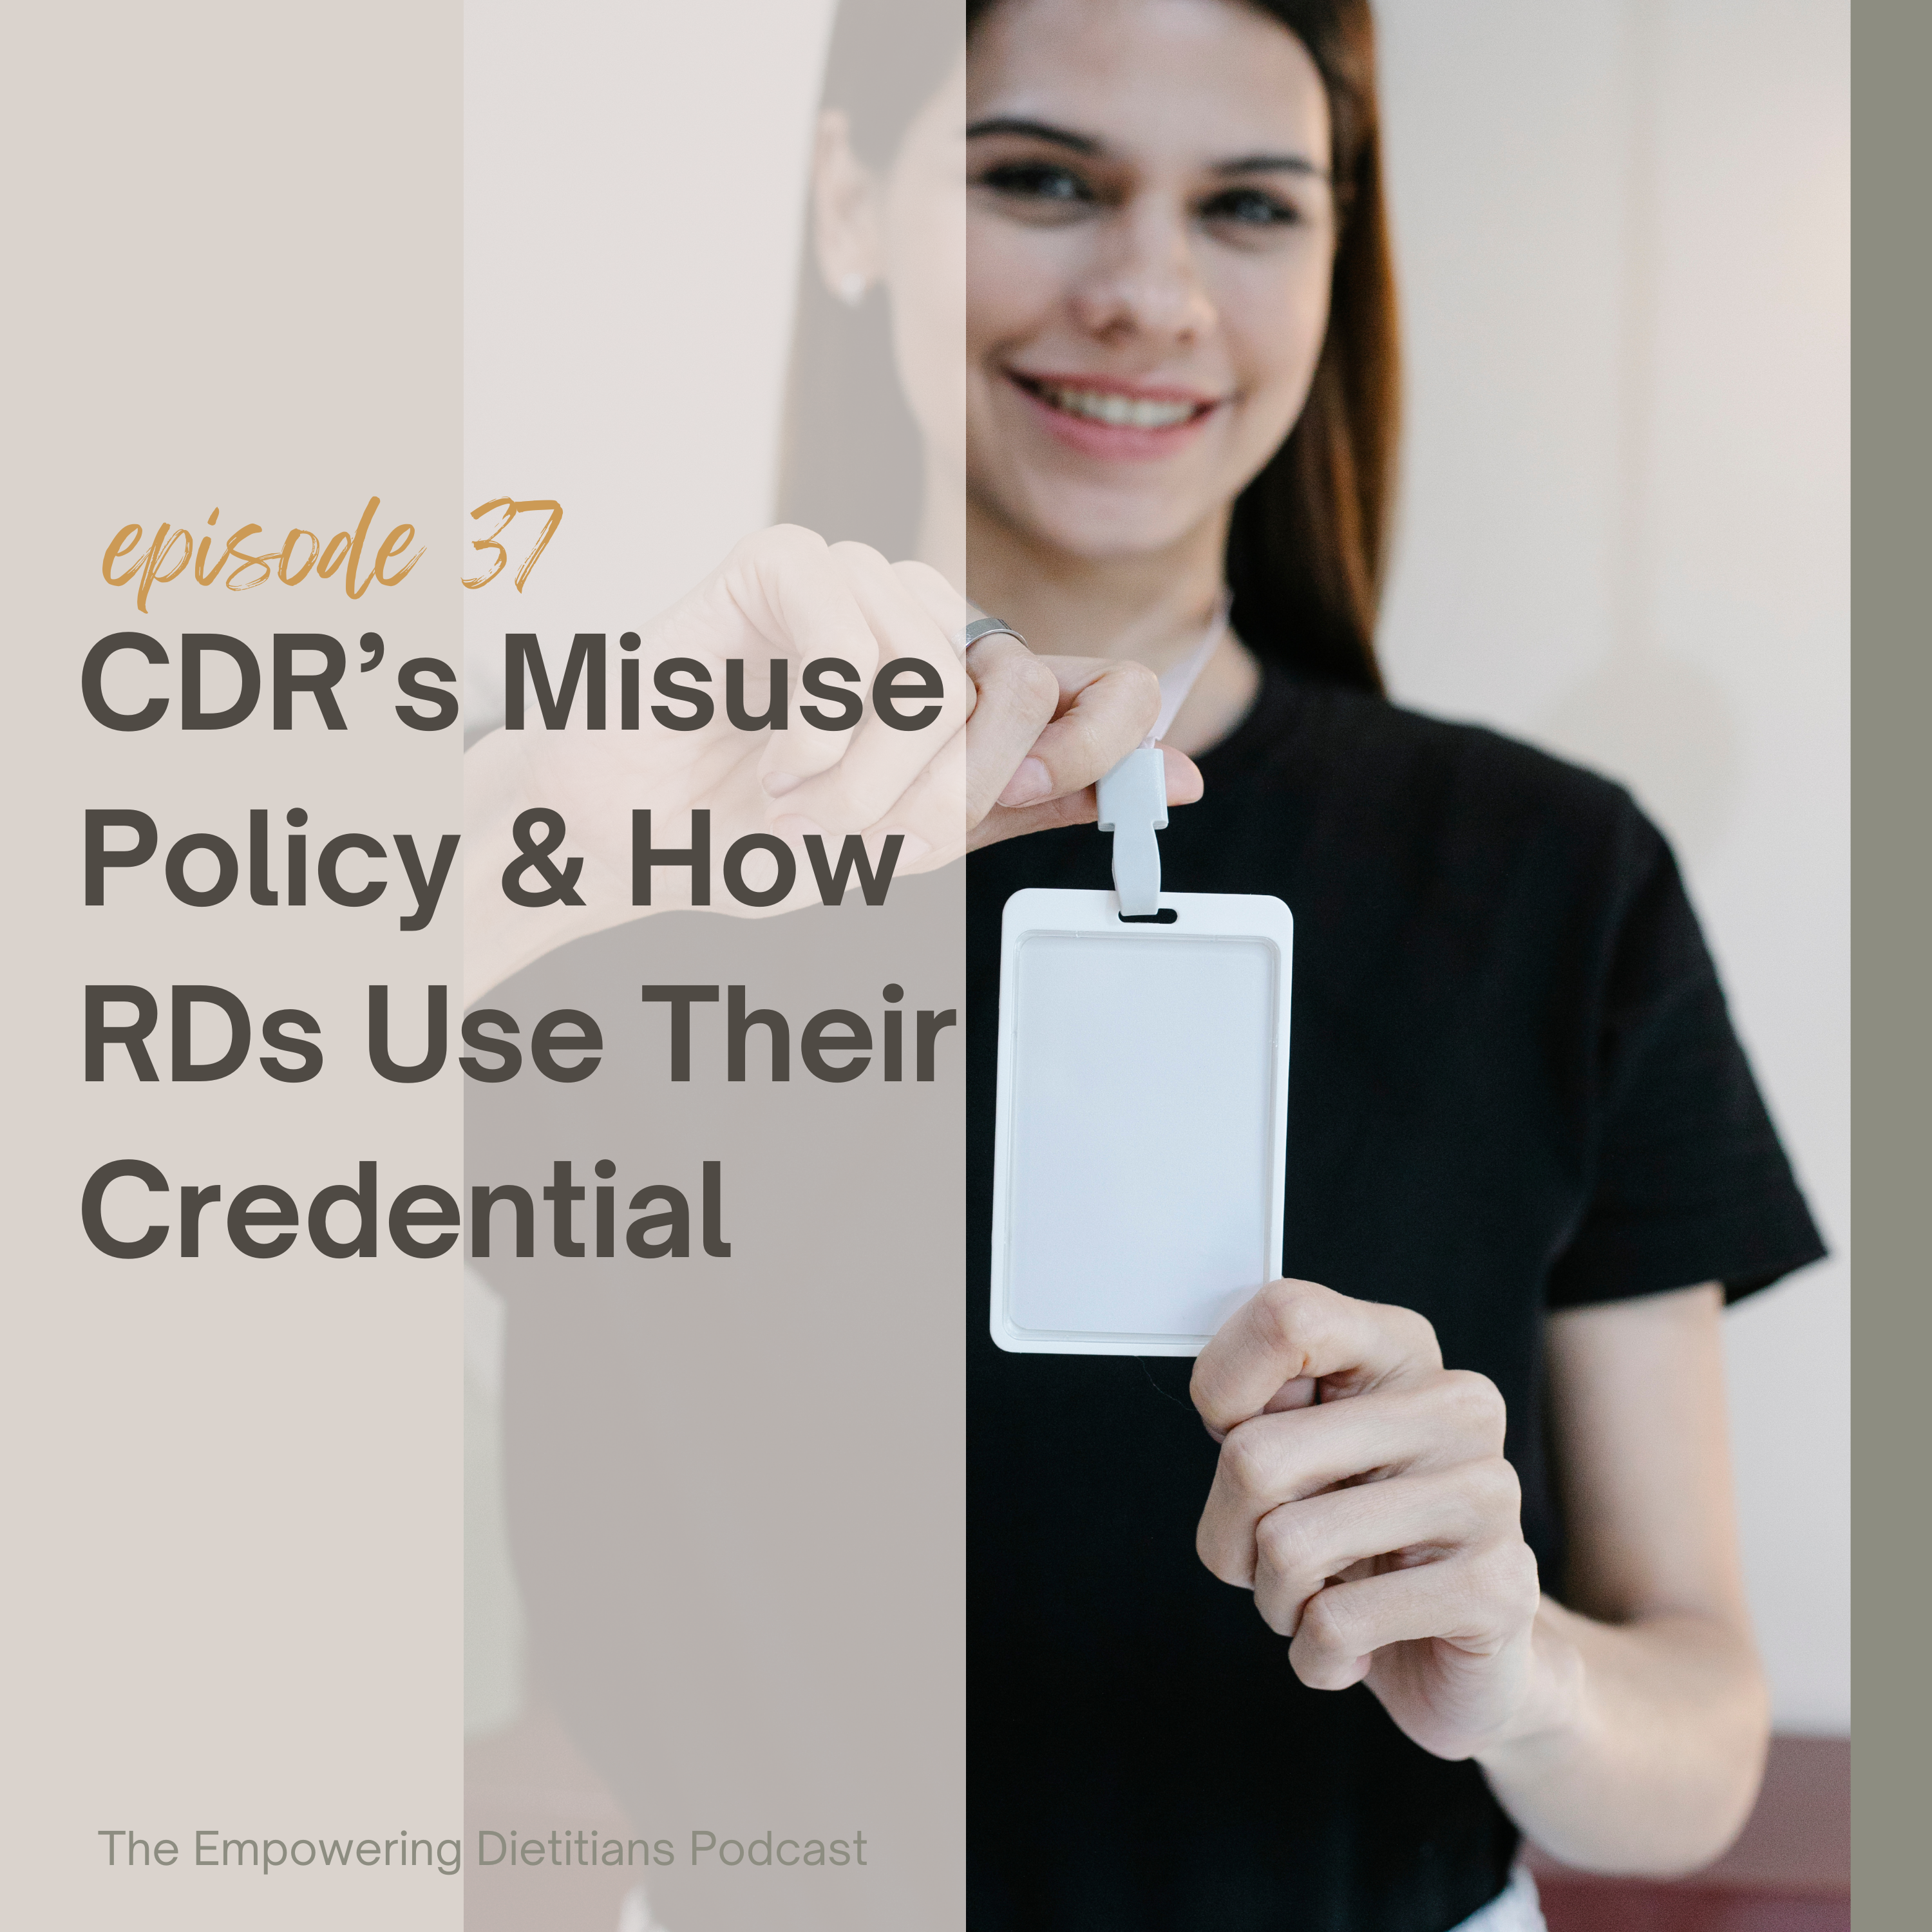 cdr's misuse policy & how rds use their credential